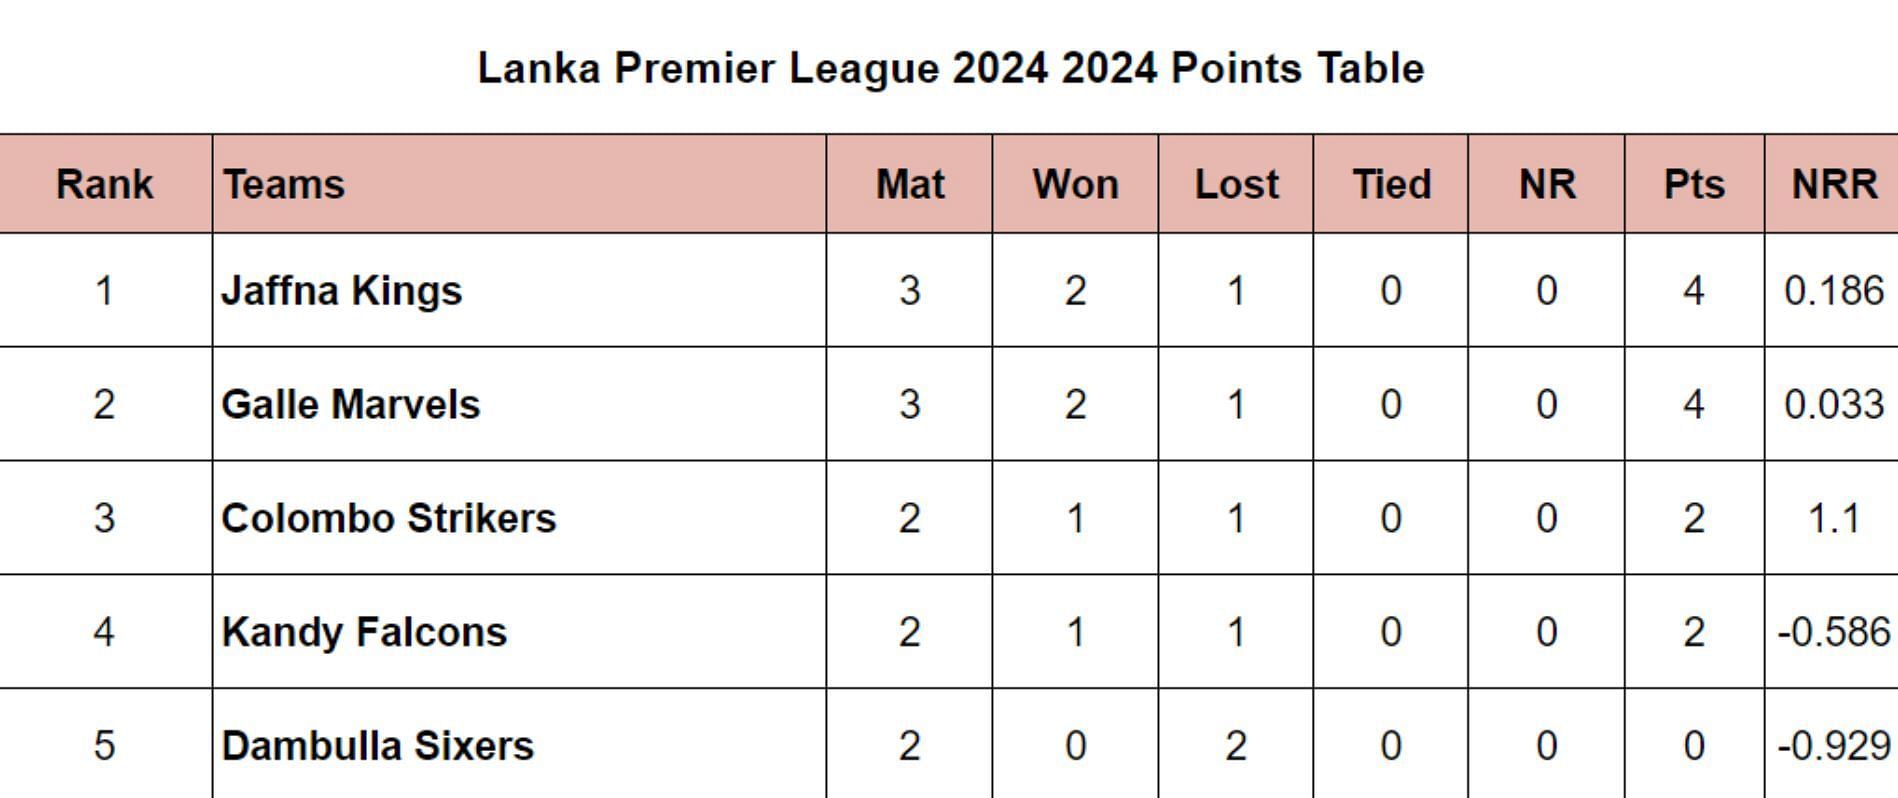 LPL 2024 Points Table: Updated Standings after Galle Marvels vs Jaffna Kings, Match 6